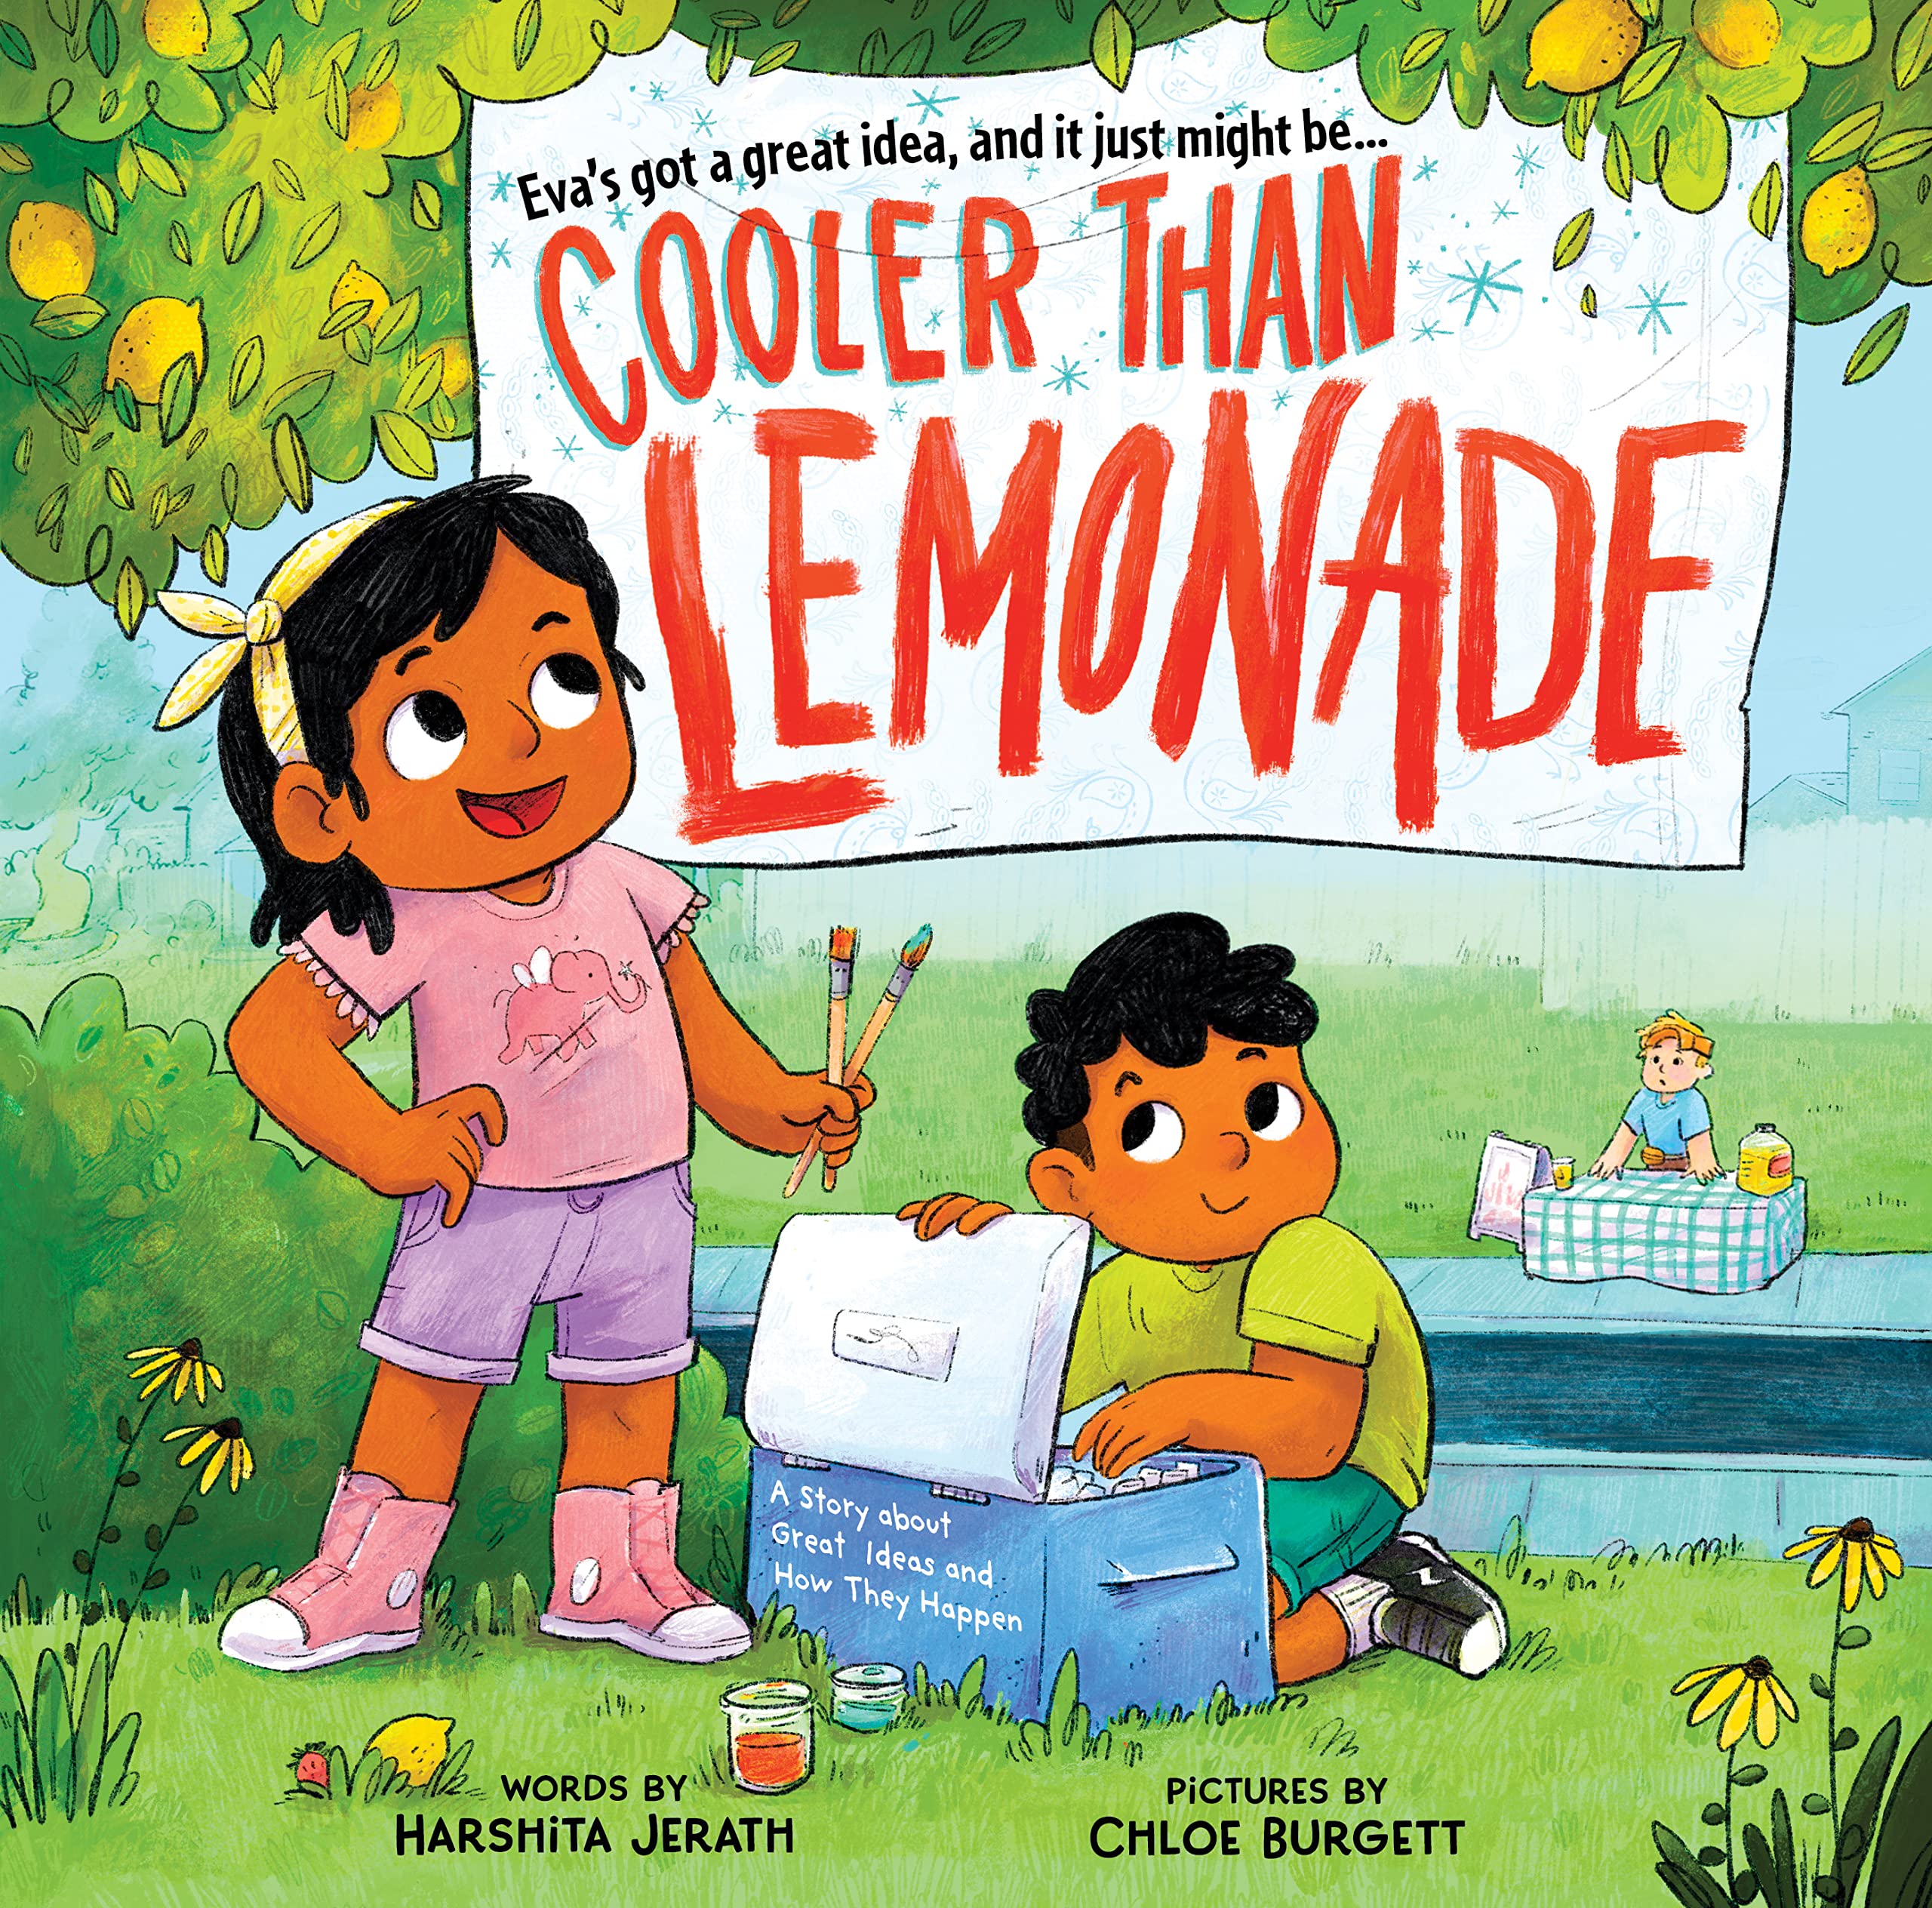 Cooler Than Lemonade: A Story about Great Ideas and How They Happen